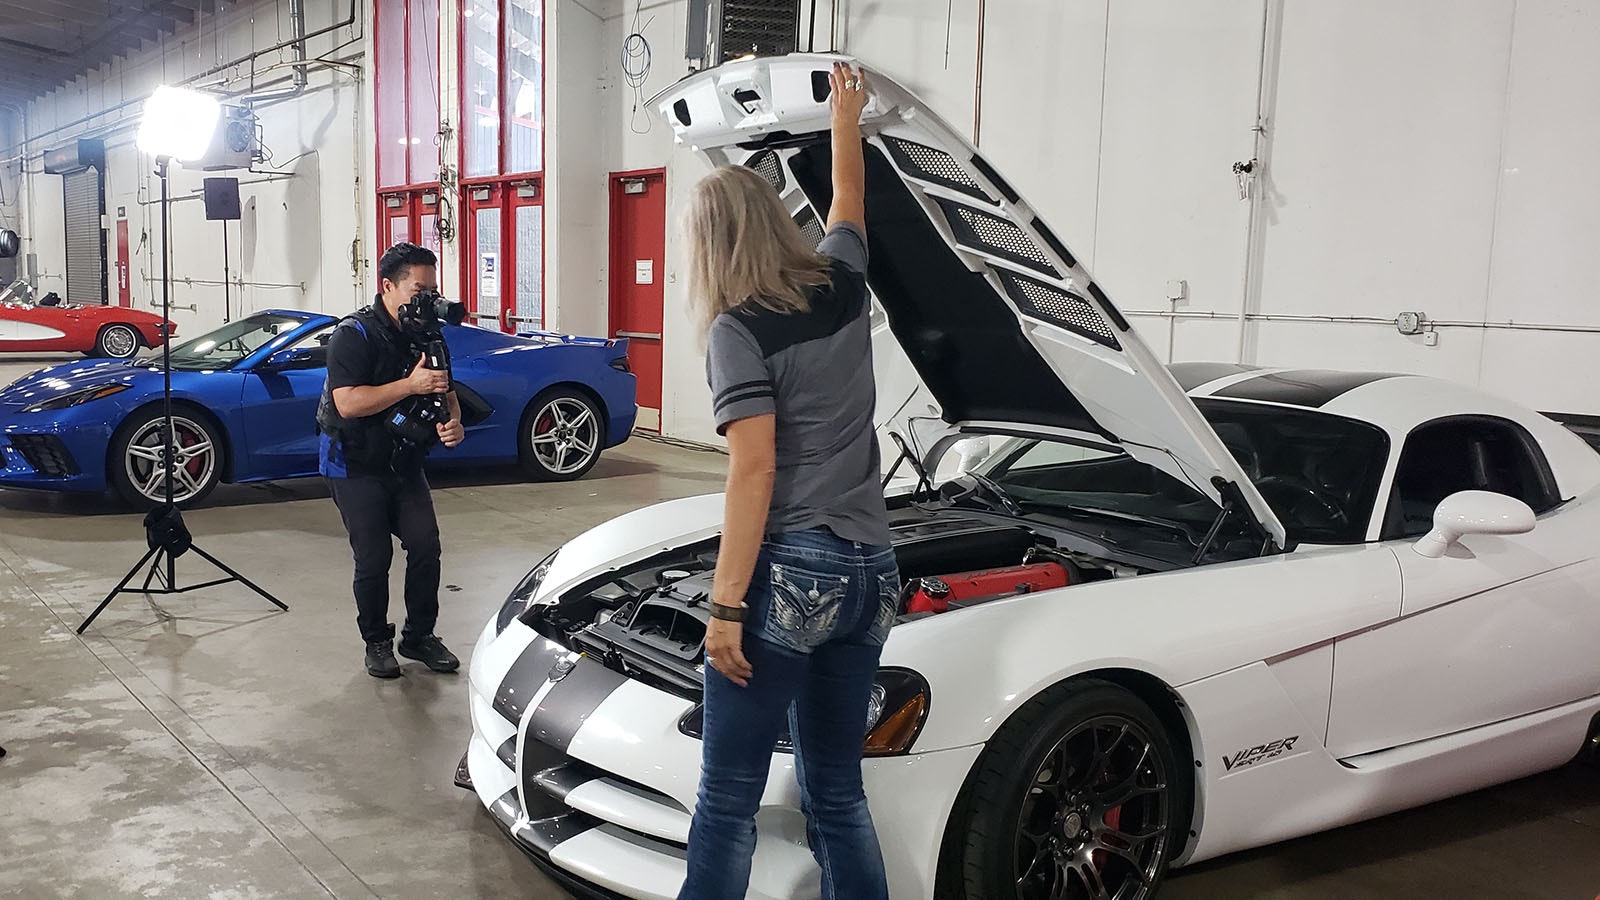 Desiree Hannabach shows her 2010 Viper to a crew filming for a nationally television show during last weekend's Cars, Guitars and Cigars show in Cheyenne.